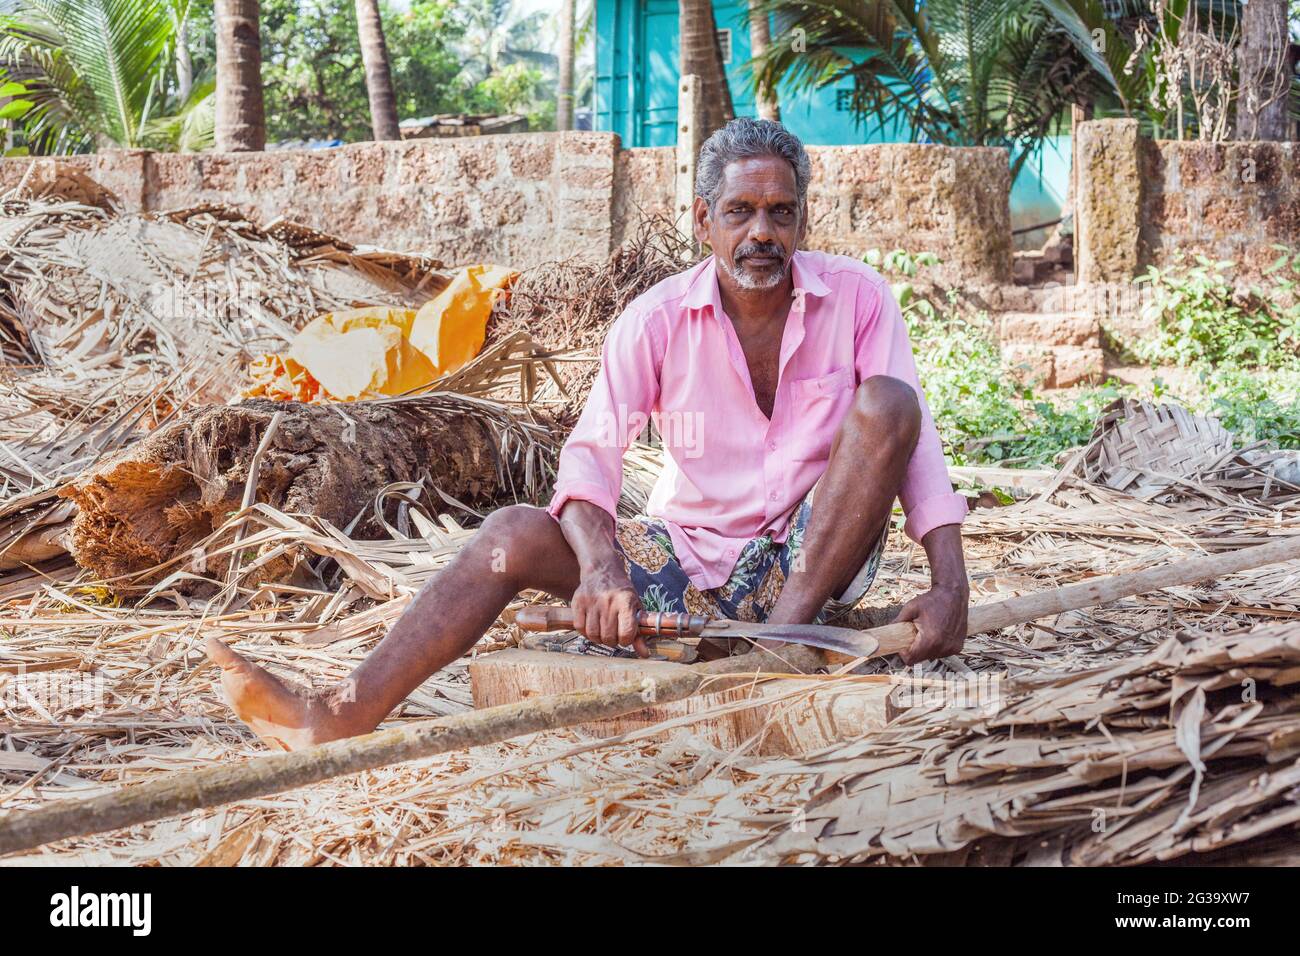 Indian manual worker wearing pink shirt and using machete poses for portrait, Agonda, Goa, India Stock Photo